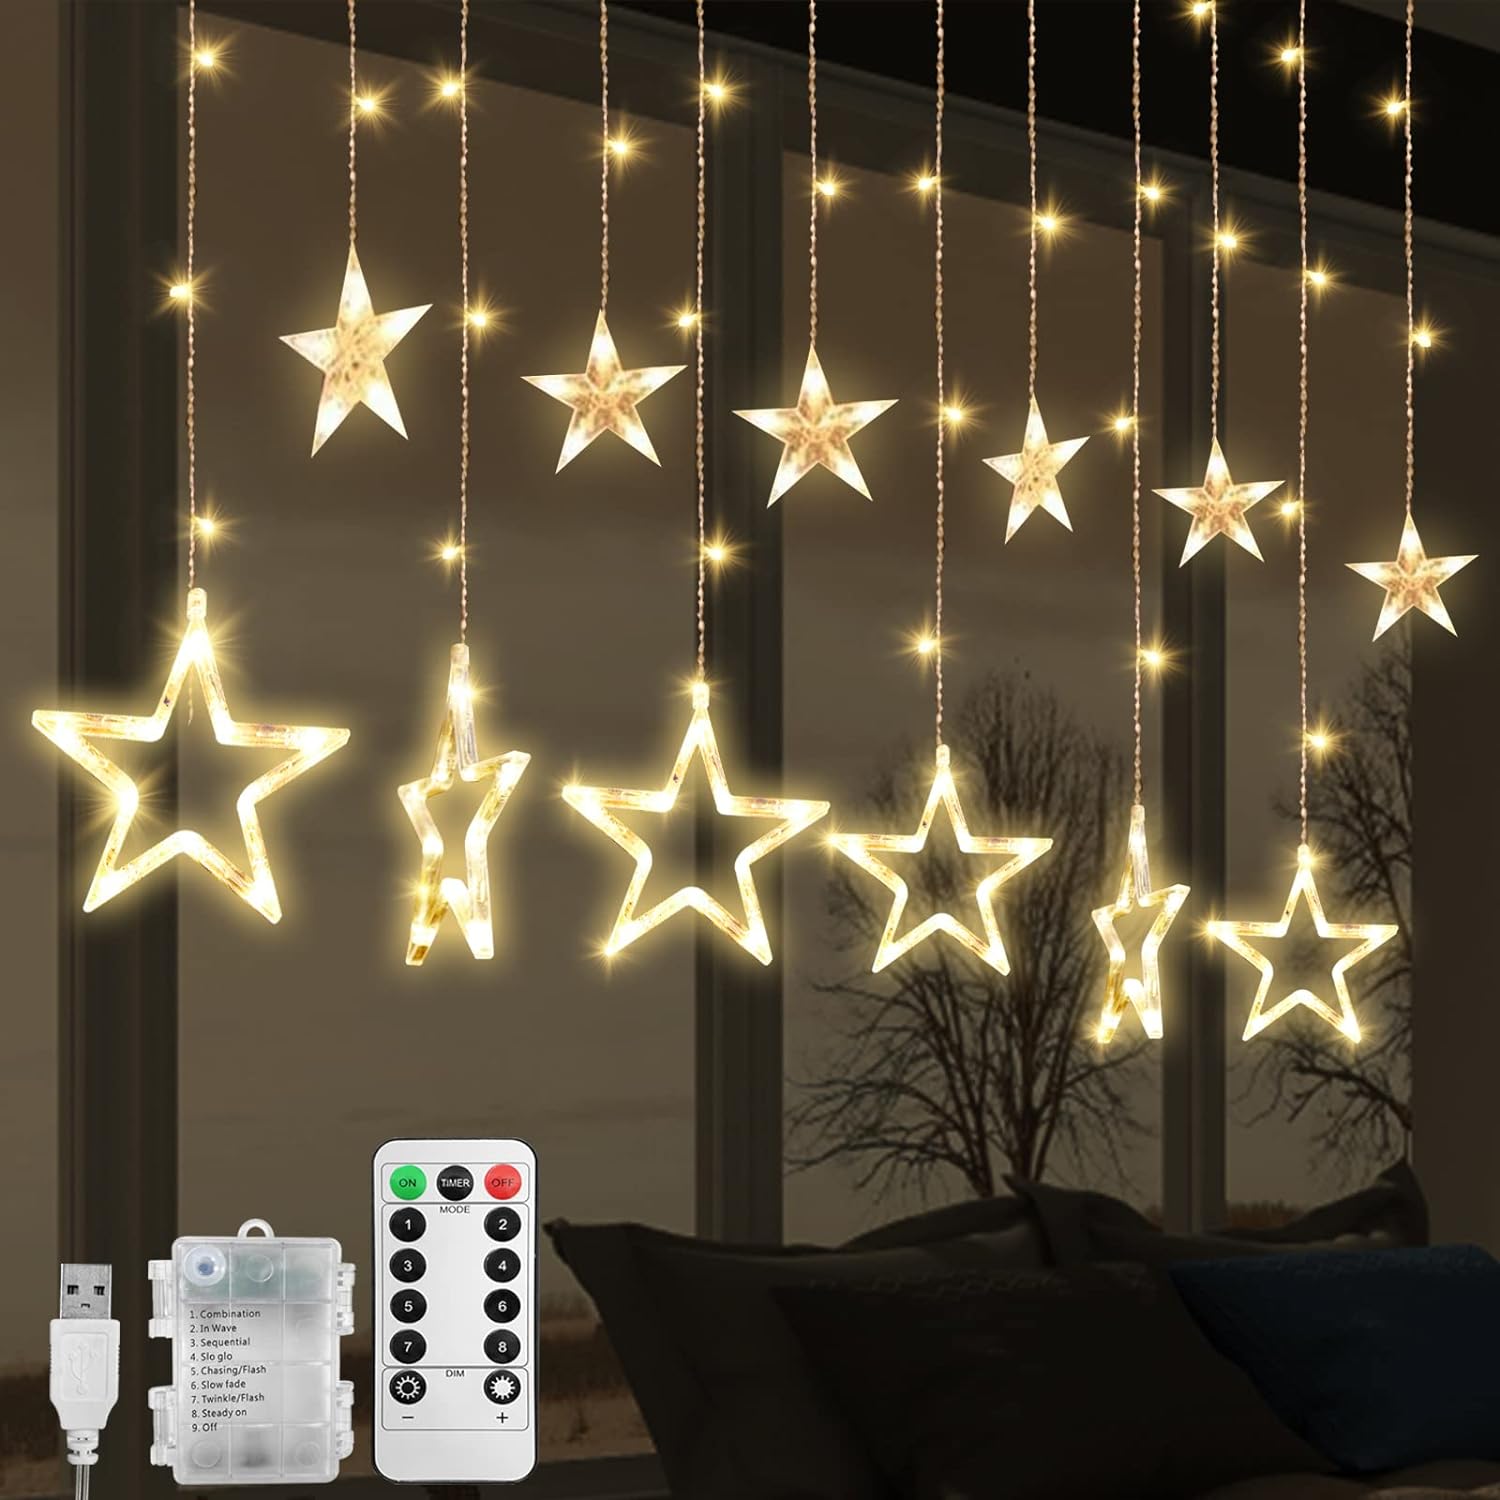 Jsdoin LED Stars Curtain Lights,12 Stars 138 Window Curtain String Lights with 8 Flashing Modes Decoration for Christmas, Wedding, Party,Wall, Home Decorations,USB/Battery Powered (Warm White)